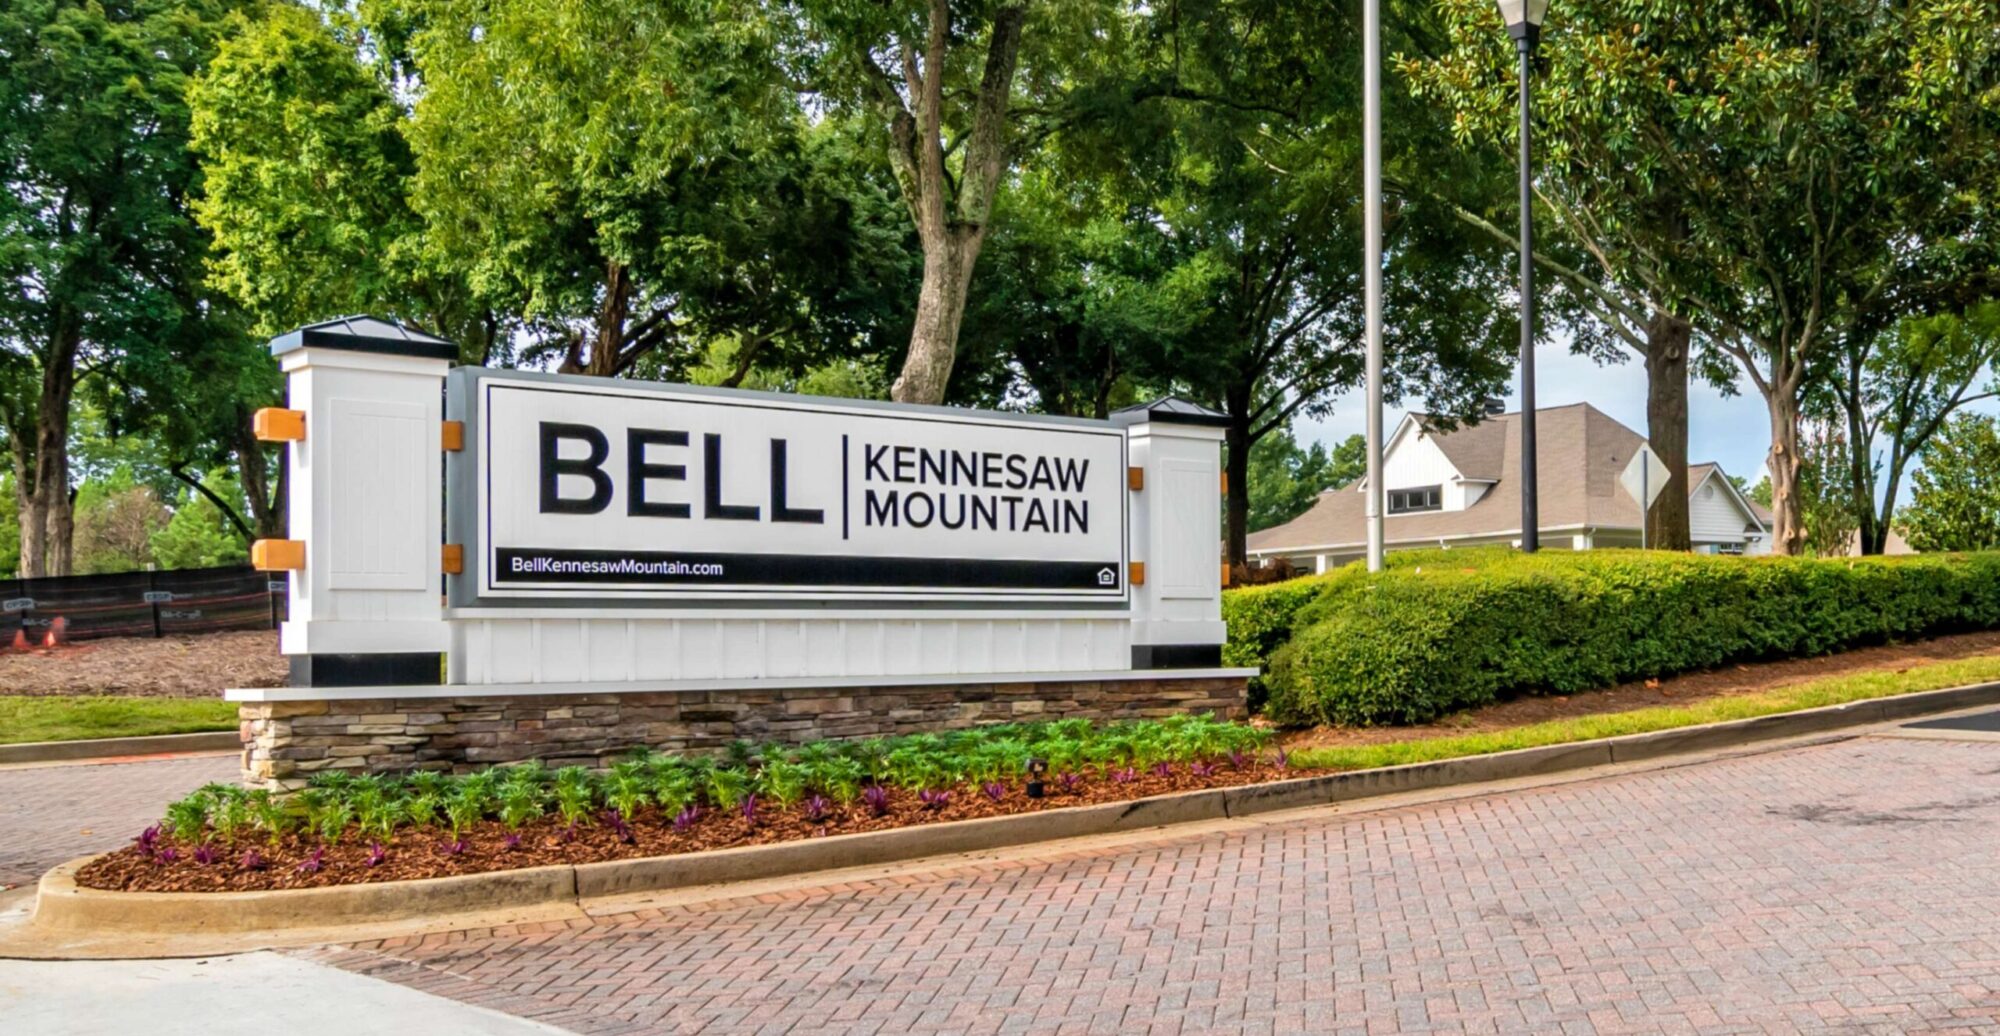 Property signs that reads, "Bell Kennesaw Mountain," surrounded by trees and landscaping